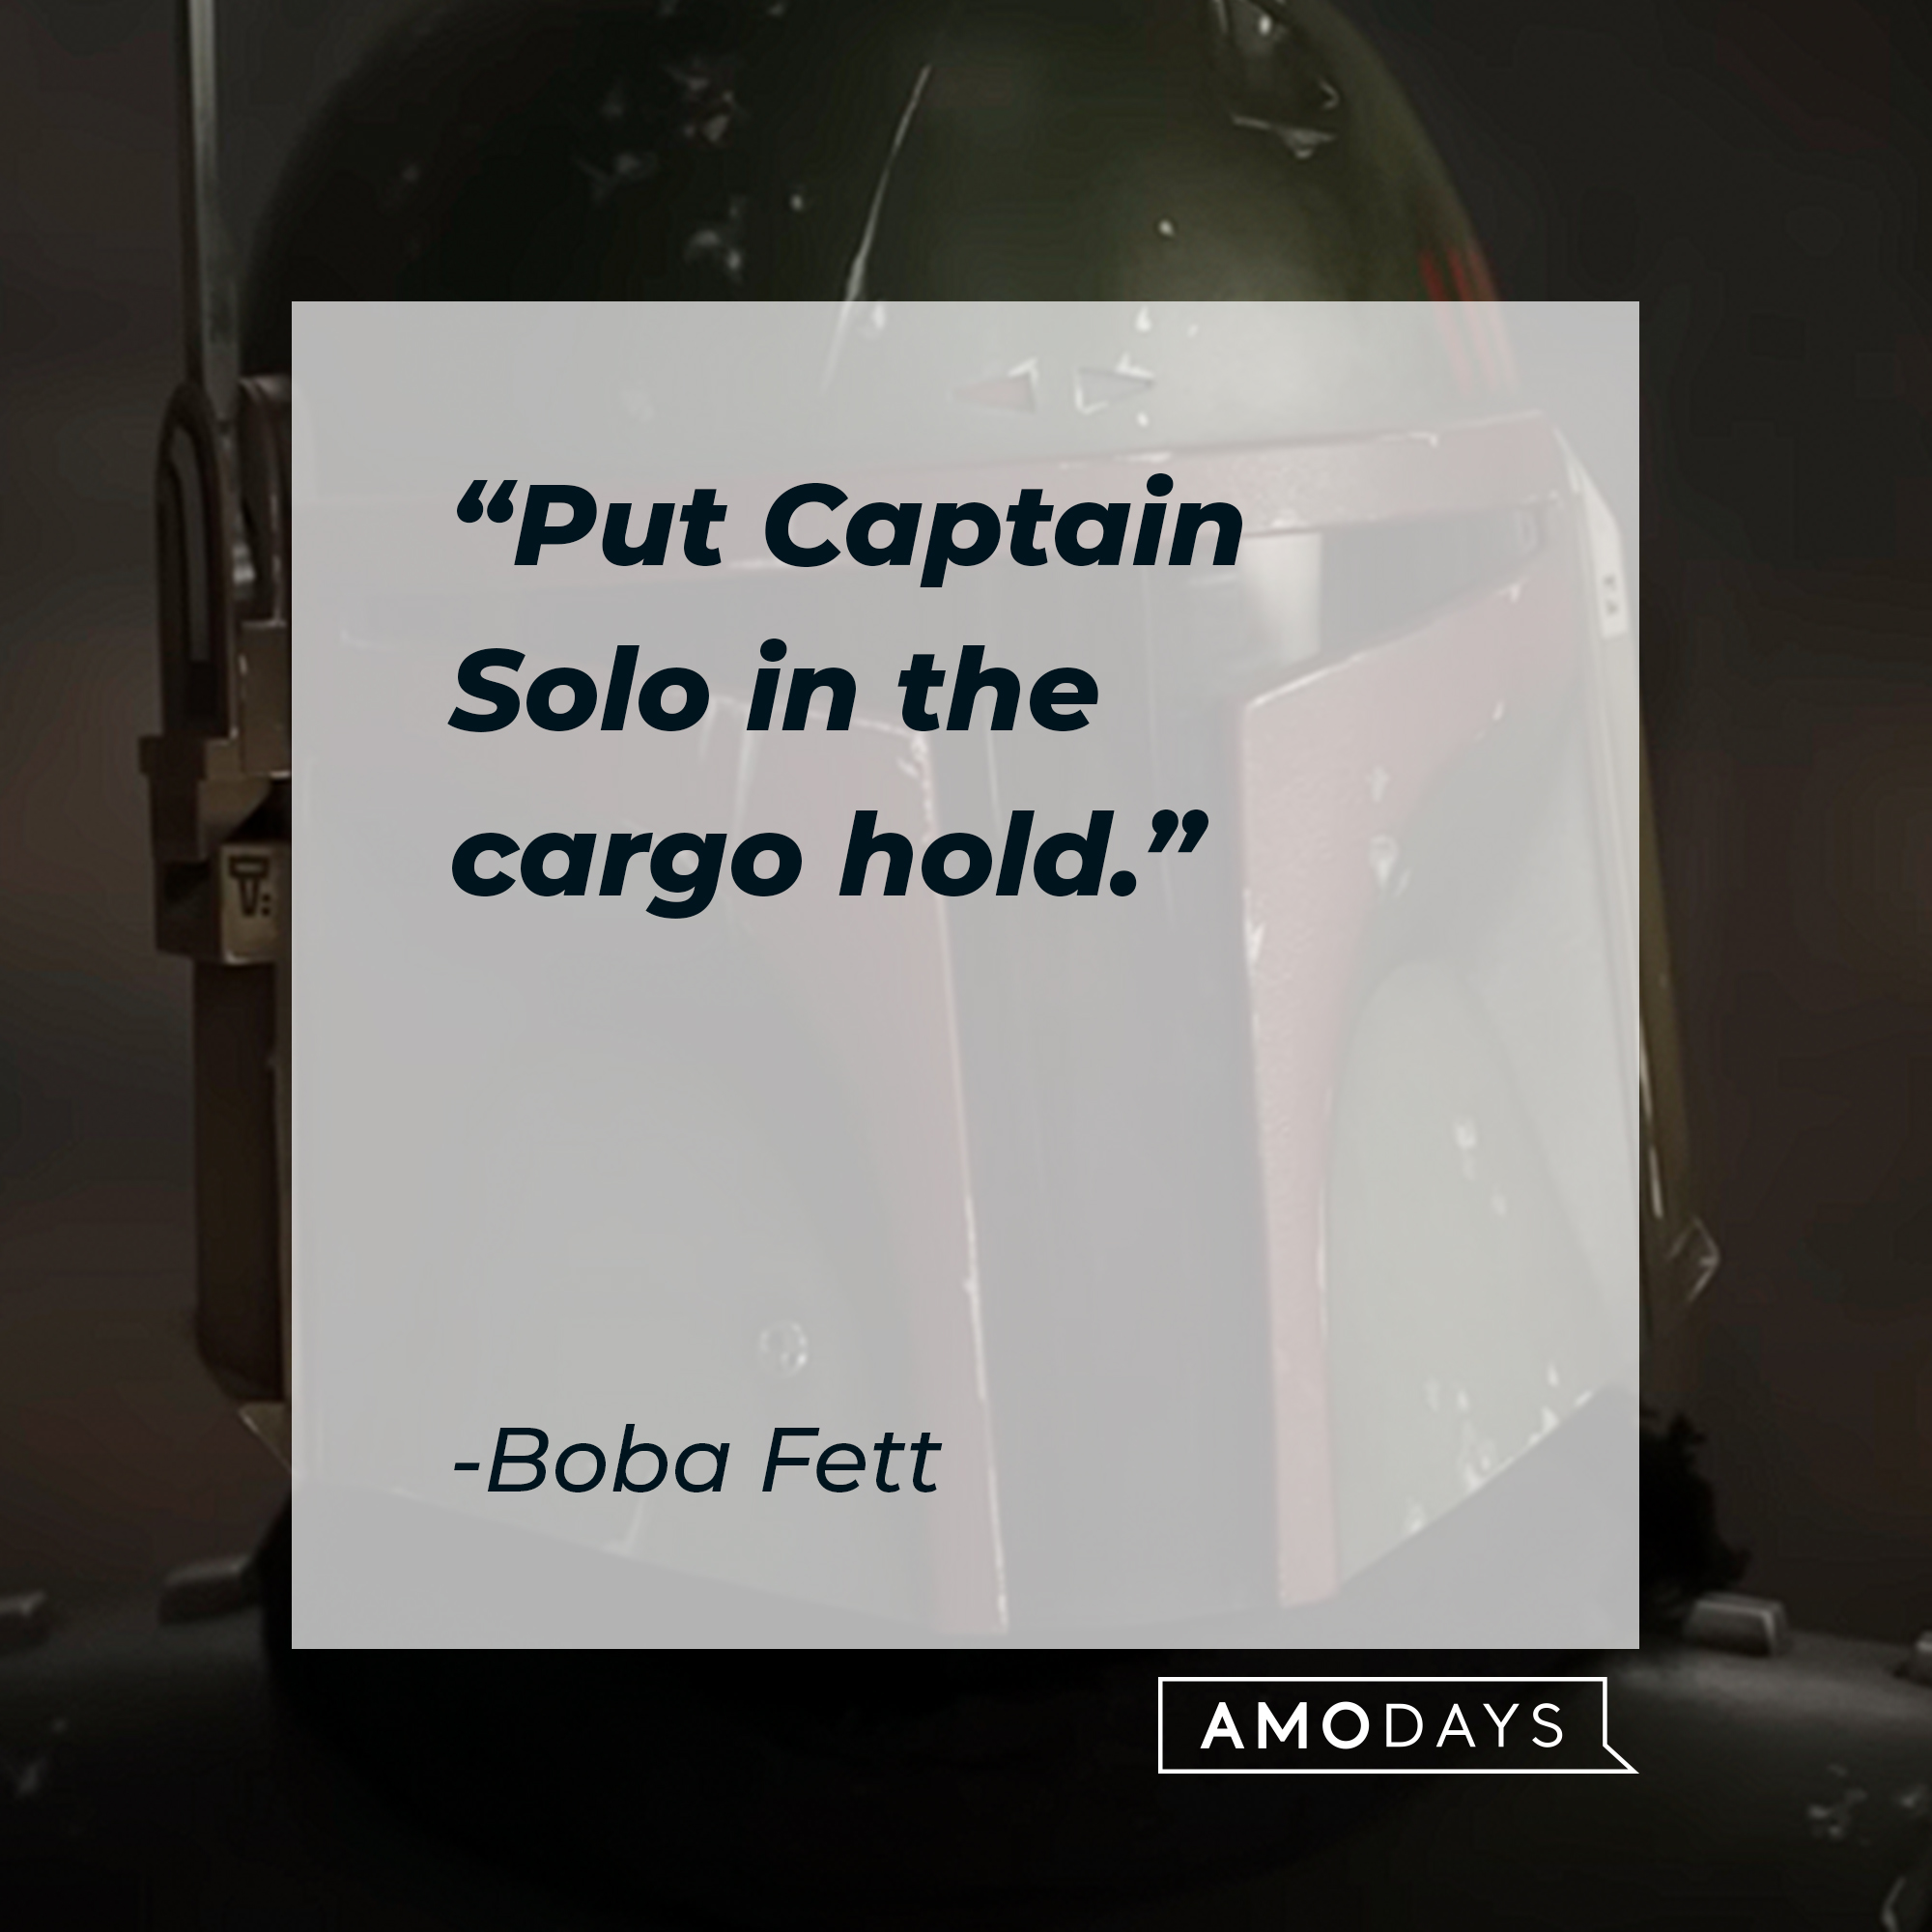 Boba Fett, with his quote: "Put Captain Solo in the cargo hold." │Source: youtube.com/StarWars